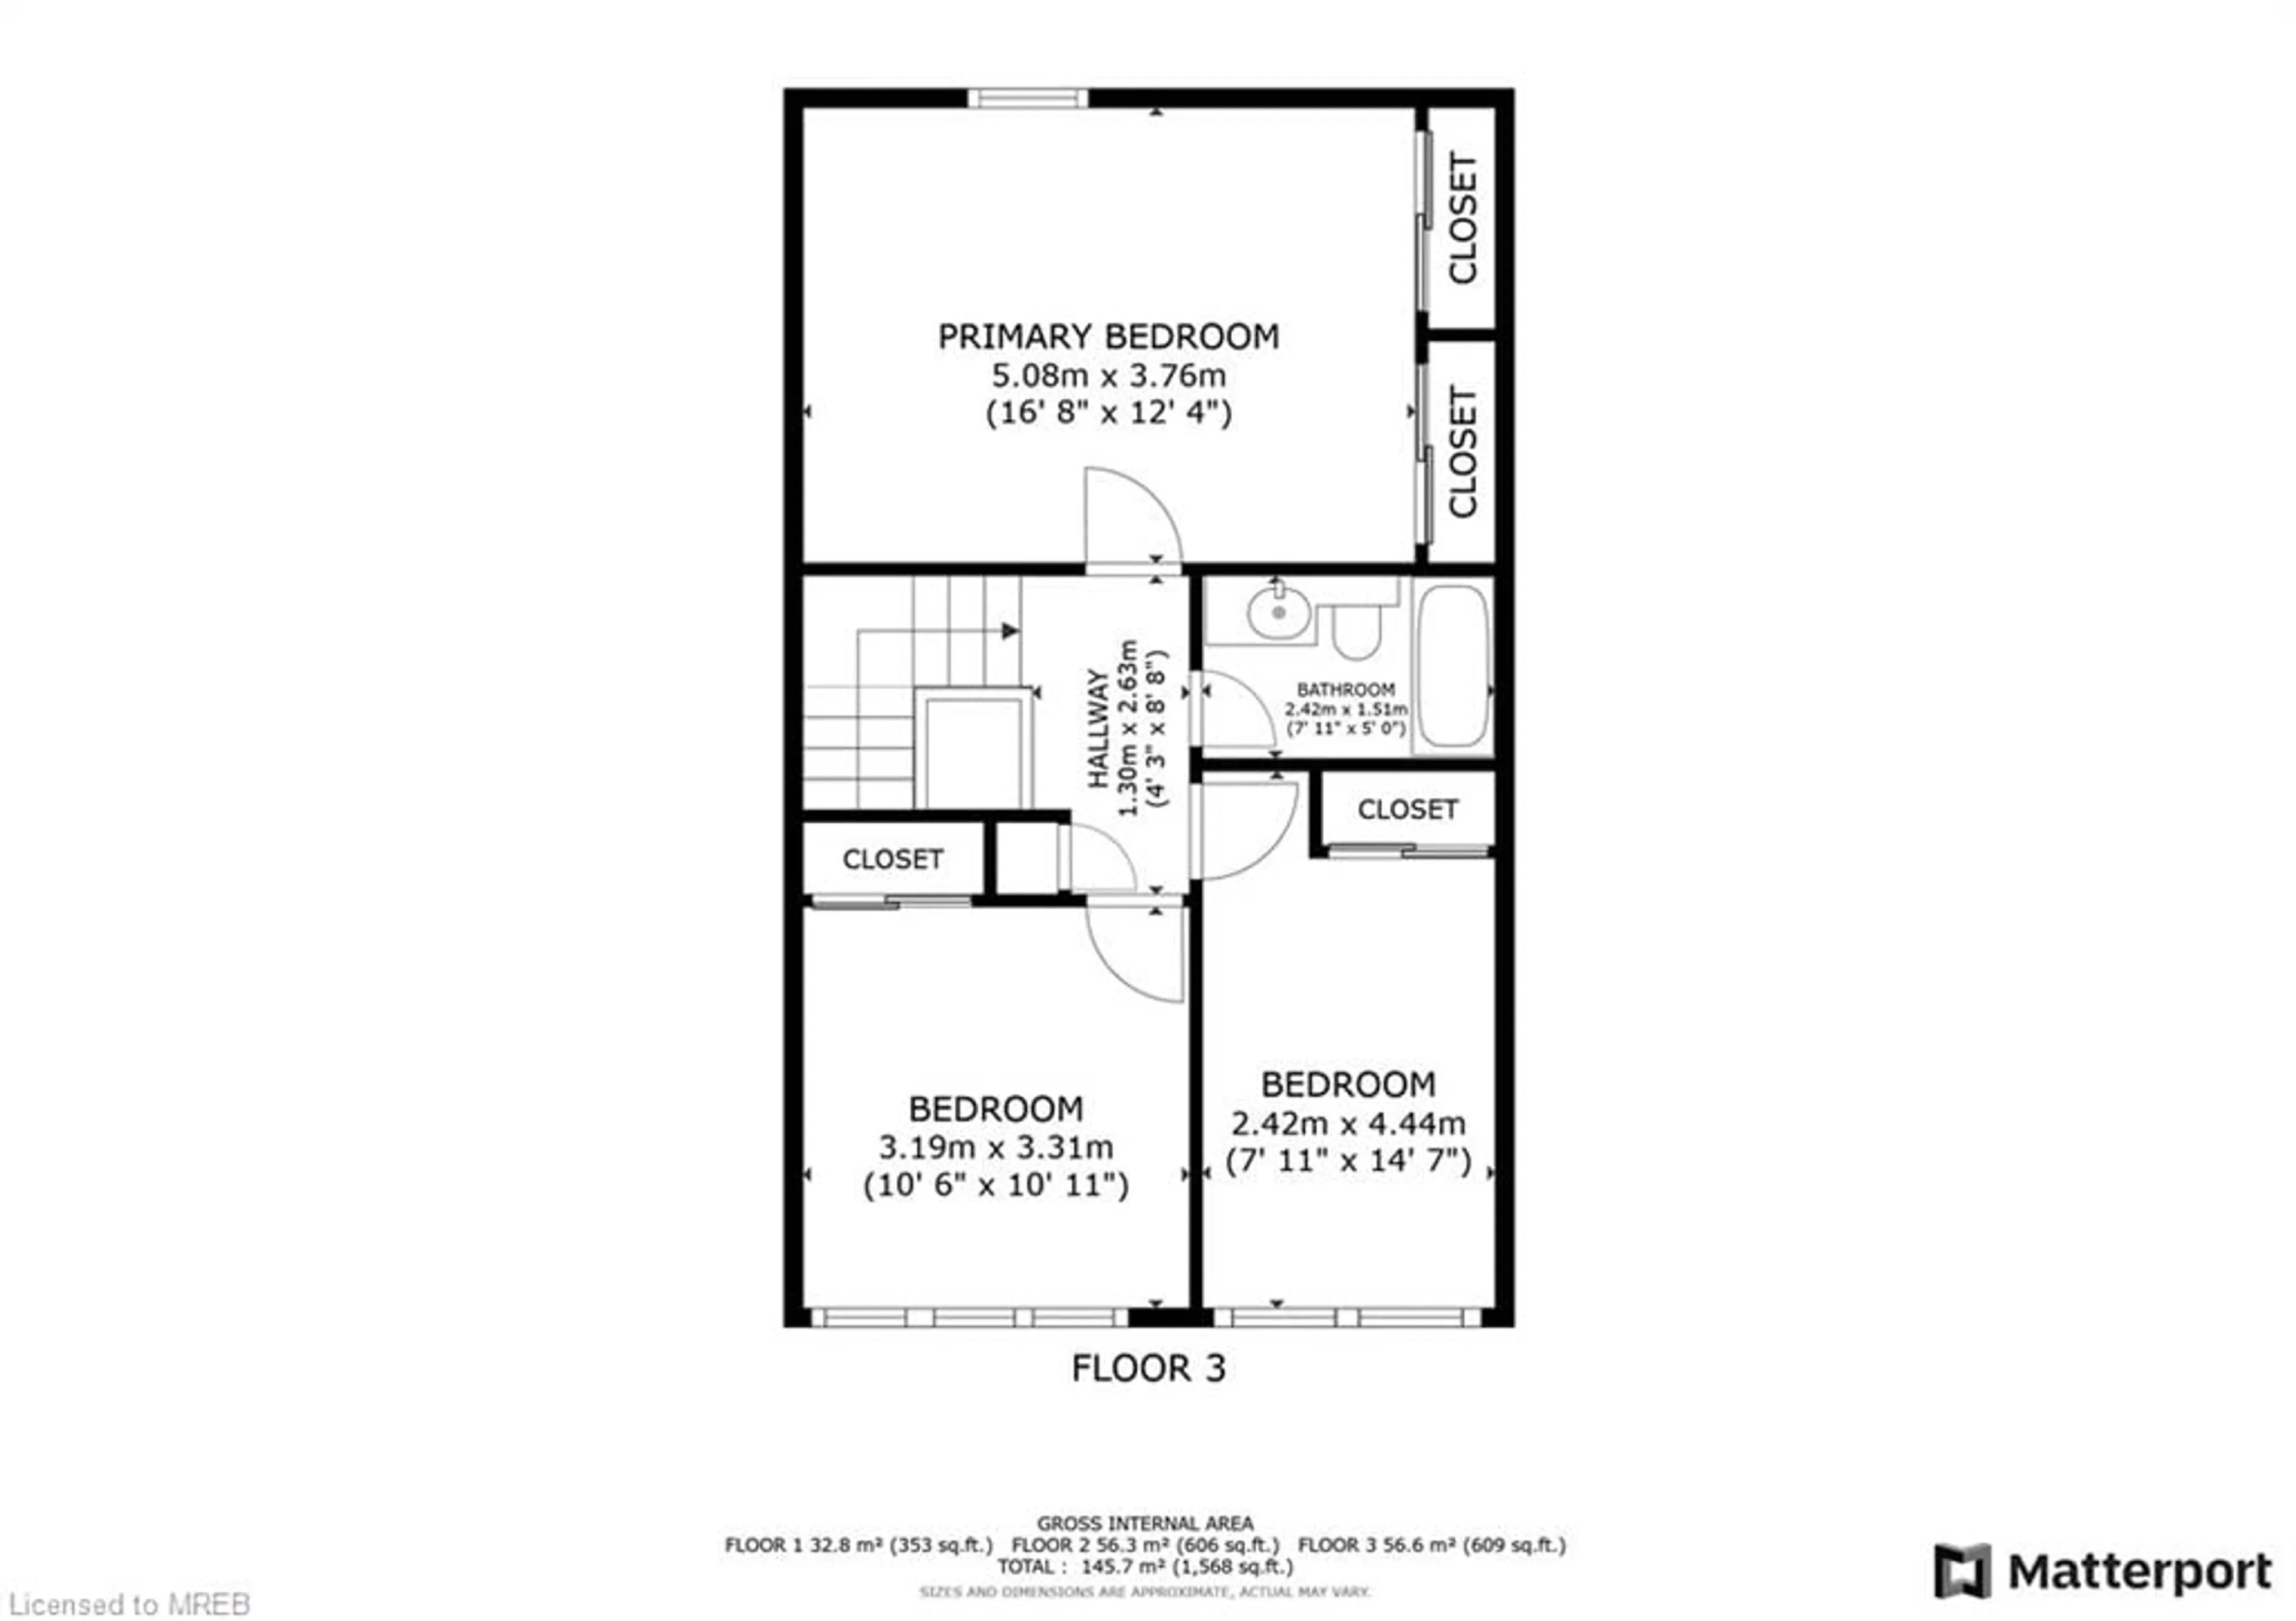 Floor plan for 2020 South Millway #27, Mississauga Ontario L5L 1K2